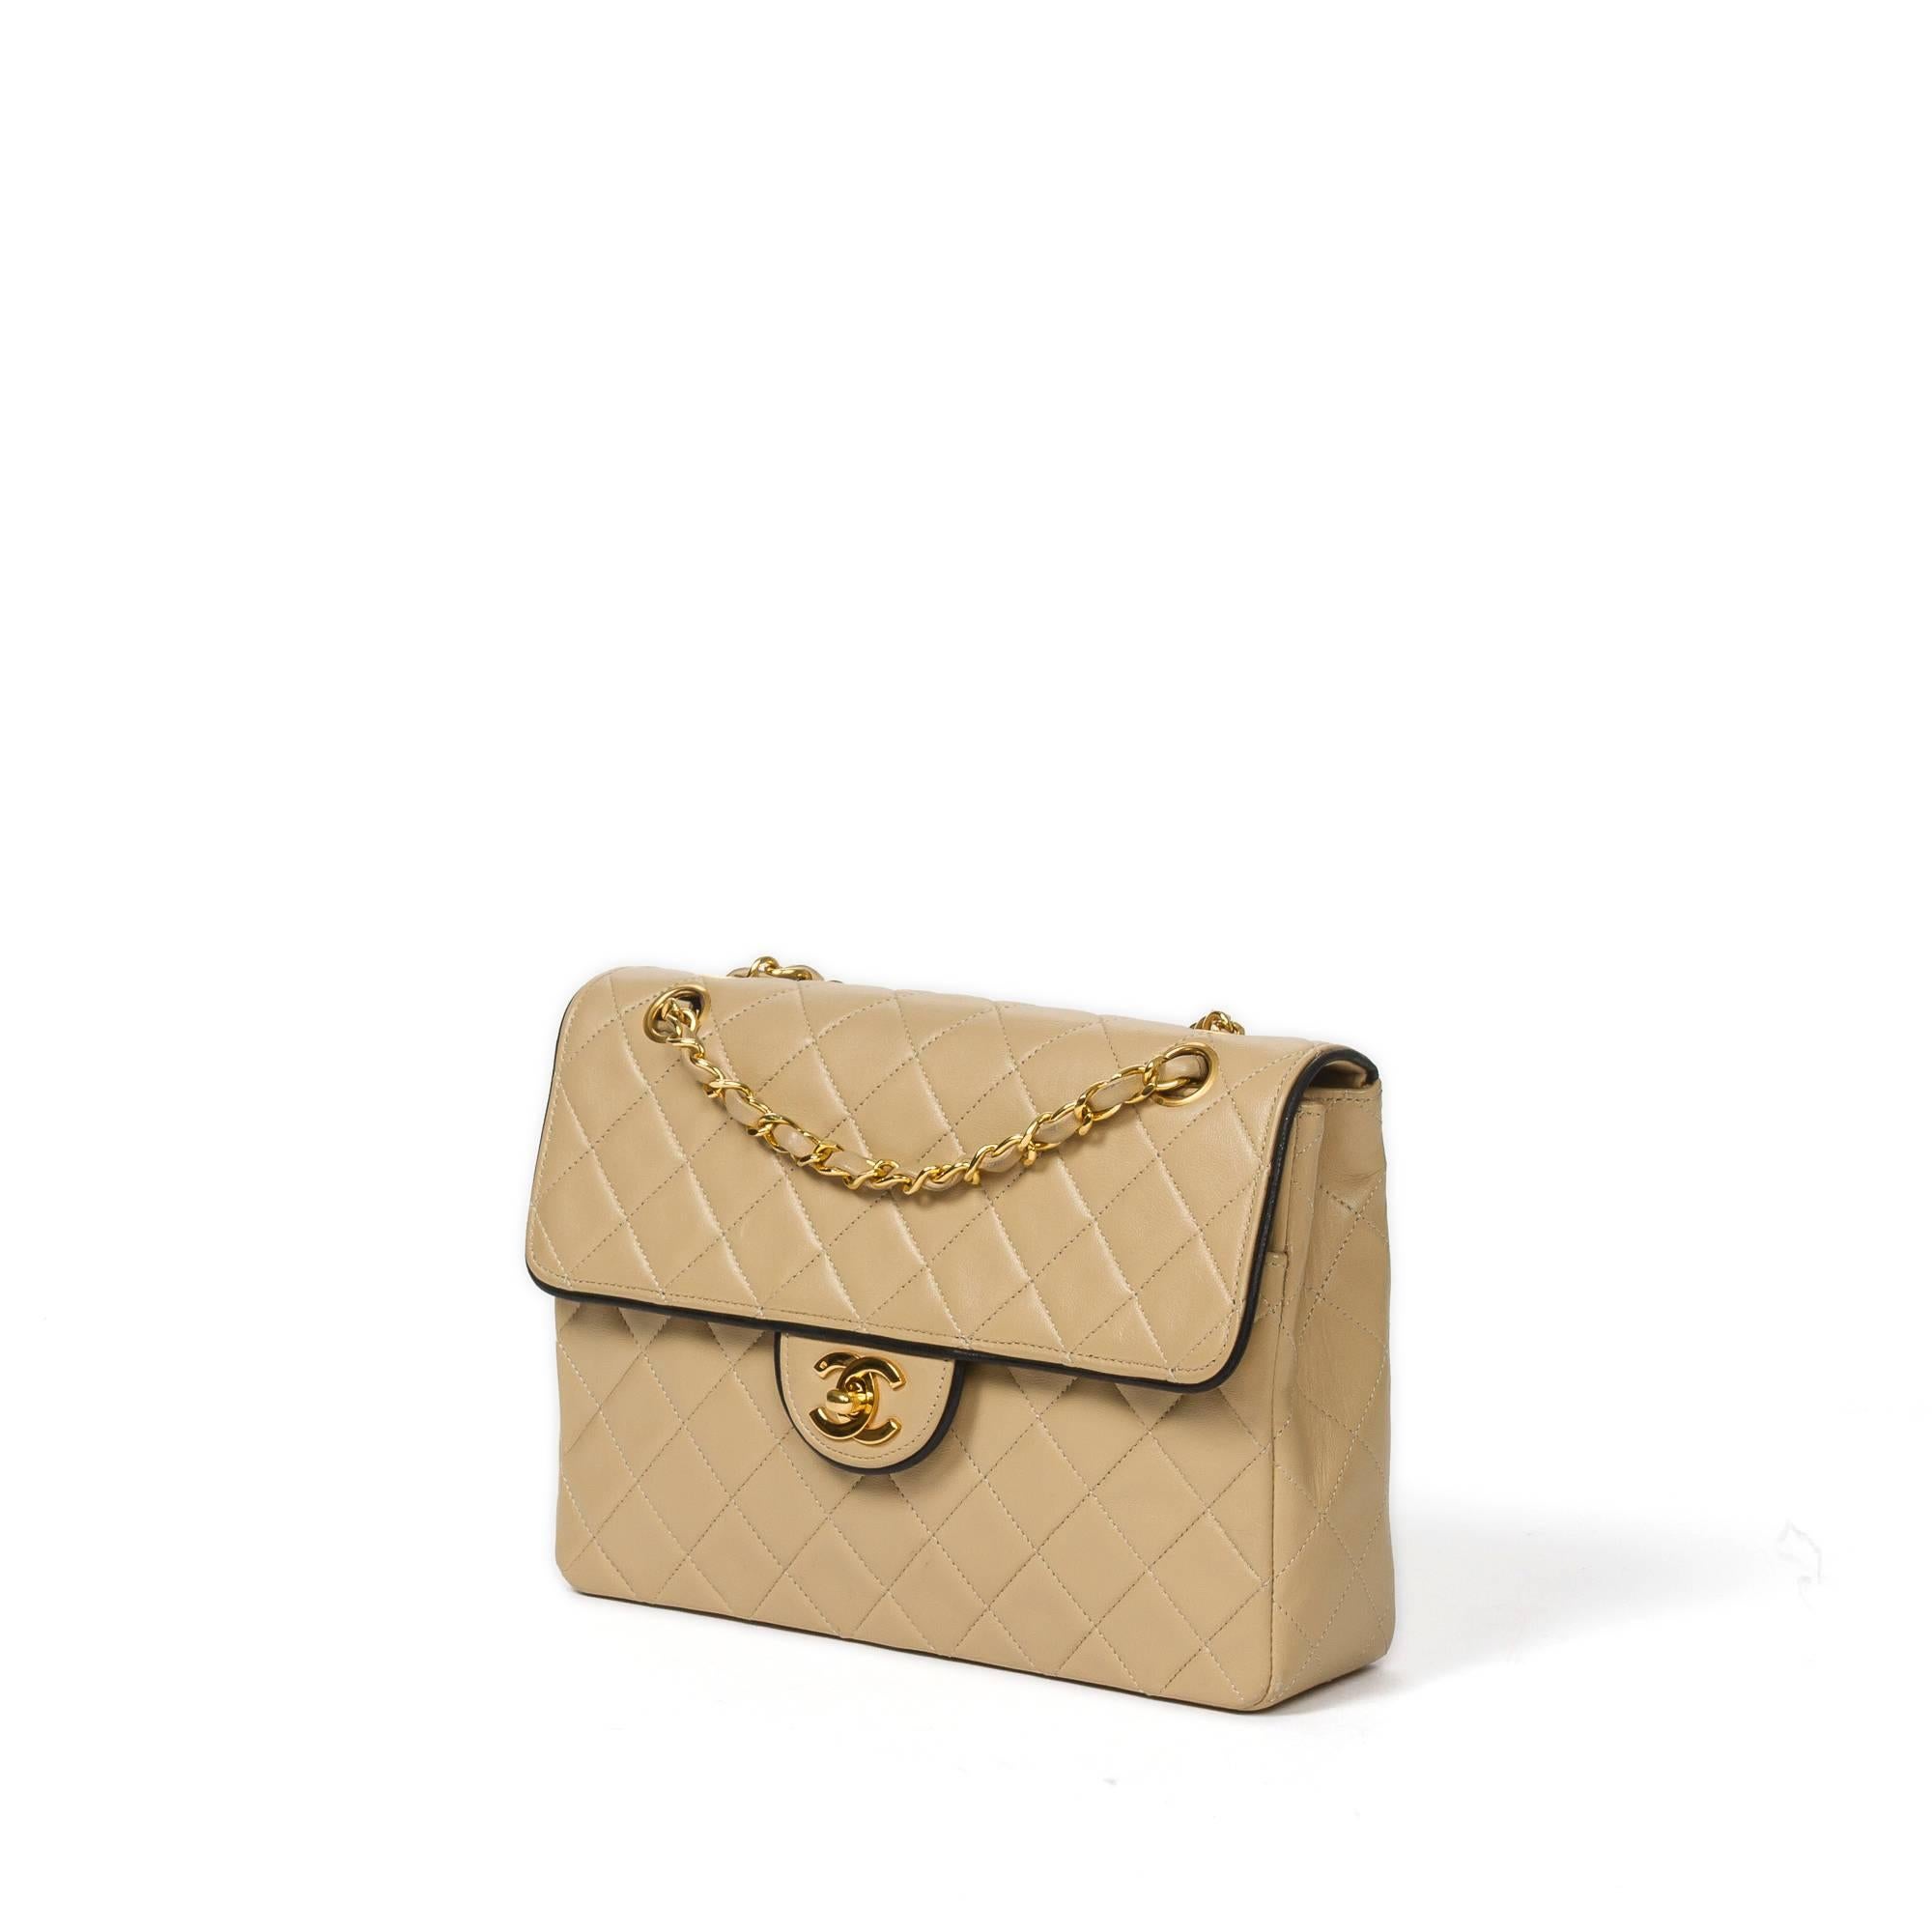 Chanel Vintage Single Flap shoulder bag 24cm in beige quilted leather and black piping, double chain strap interlaced with leather (Drop: single 40cm, double: 22cm), CC turnlock closure. Gold tone hardware. Extra slip pocket on the back. Beige